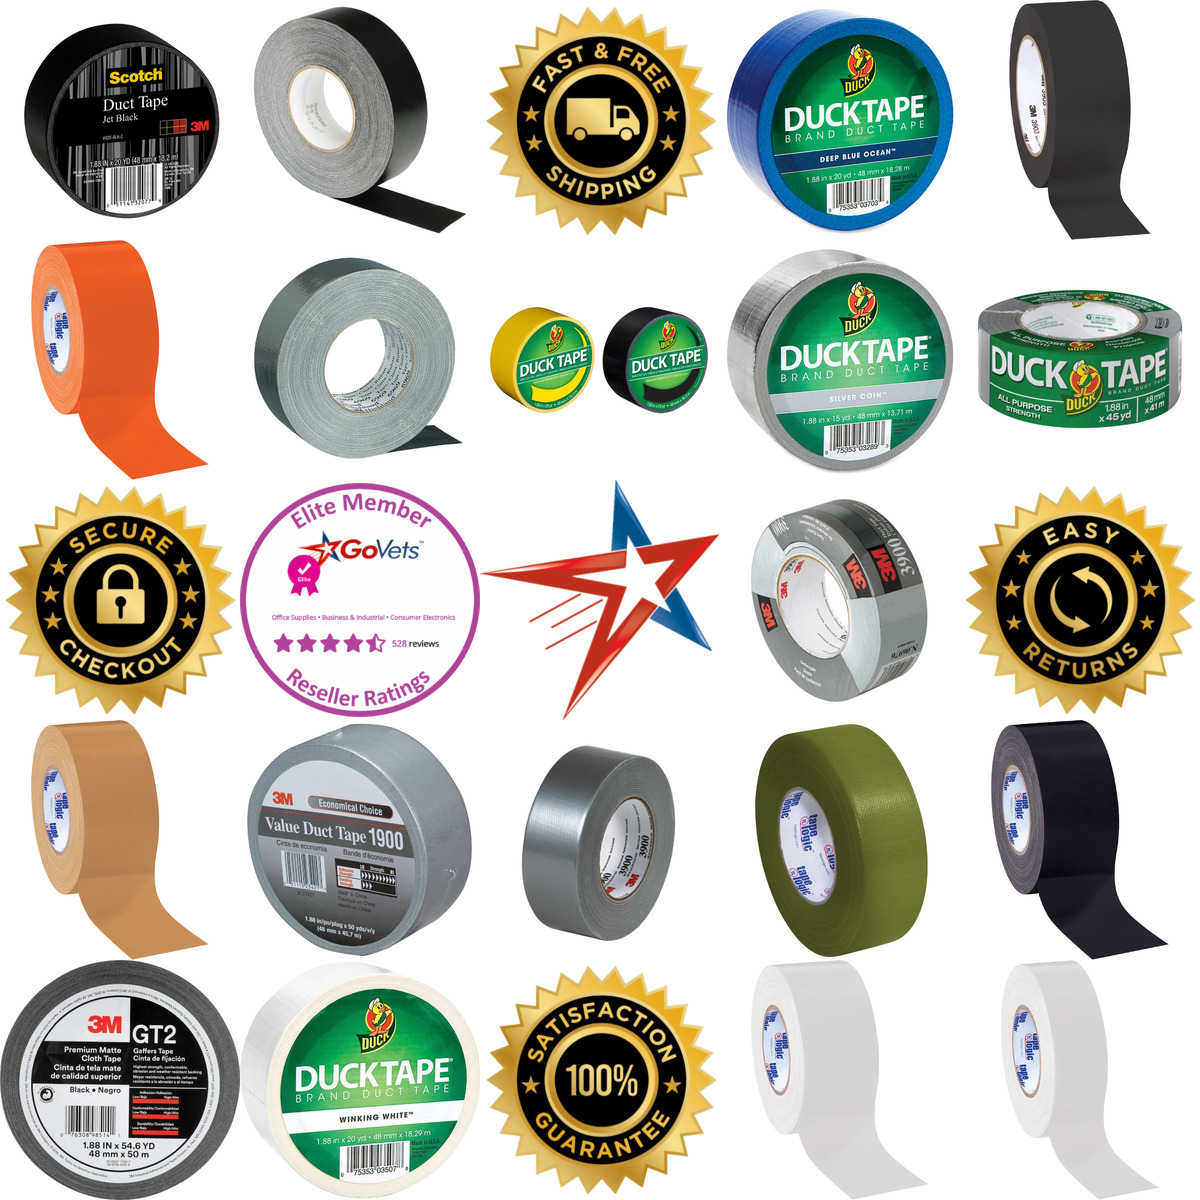 A selection of Duct Tape products on GoVets